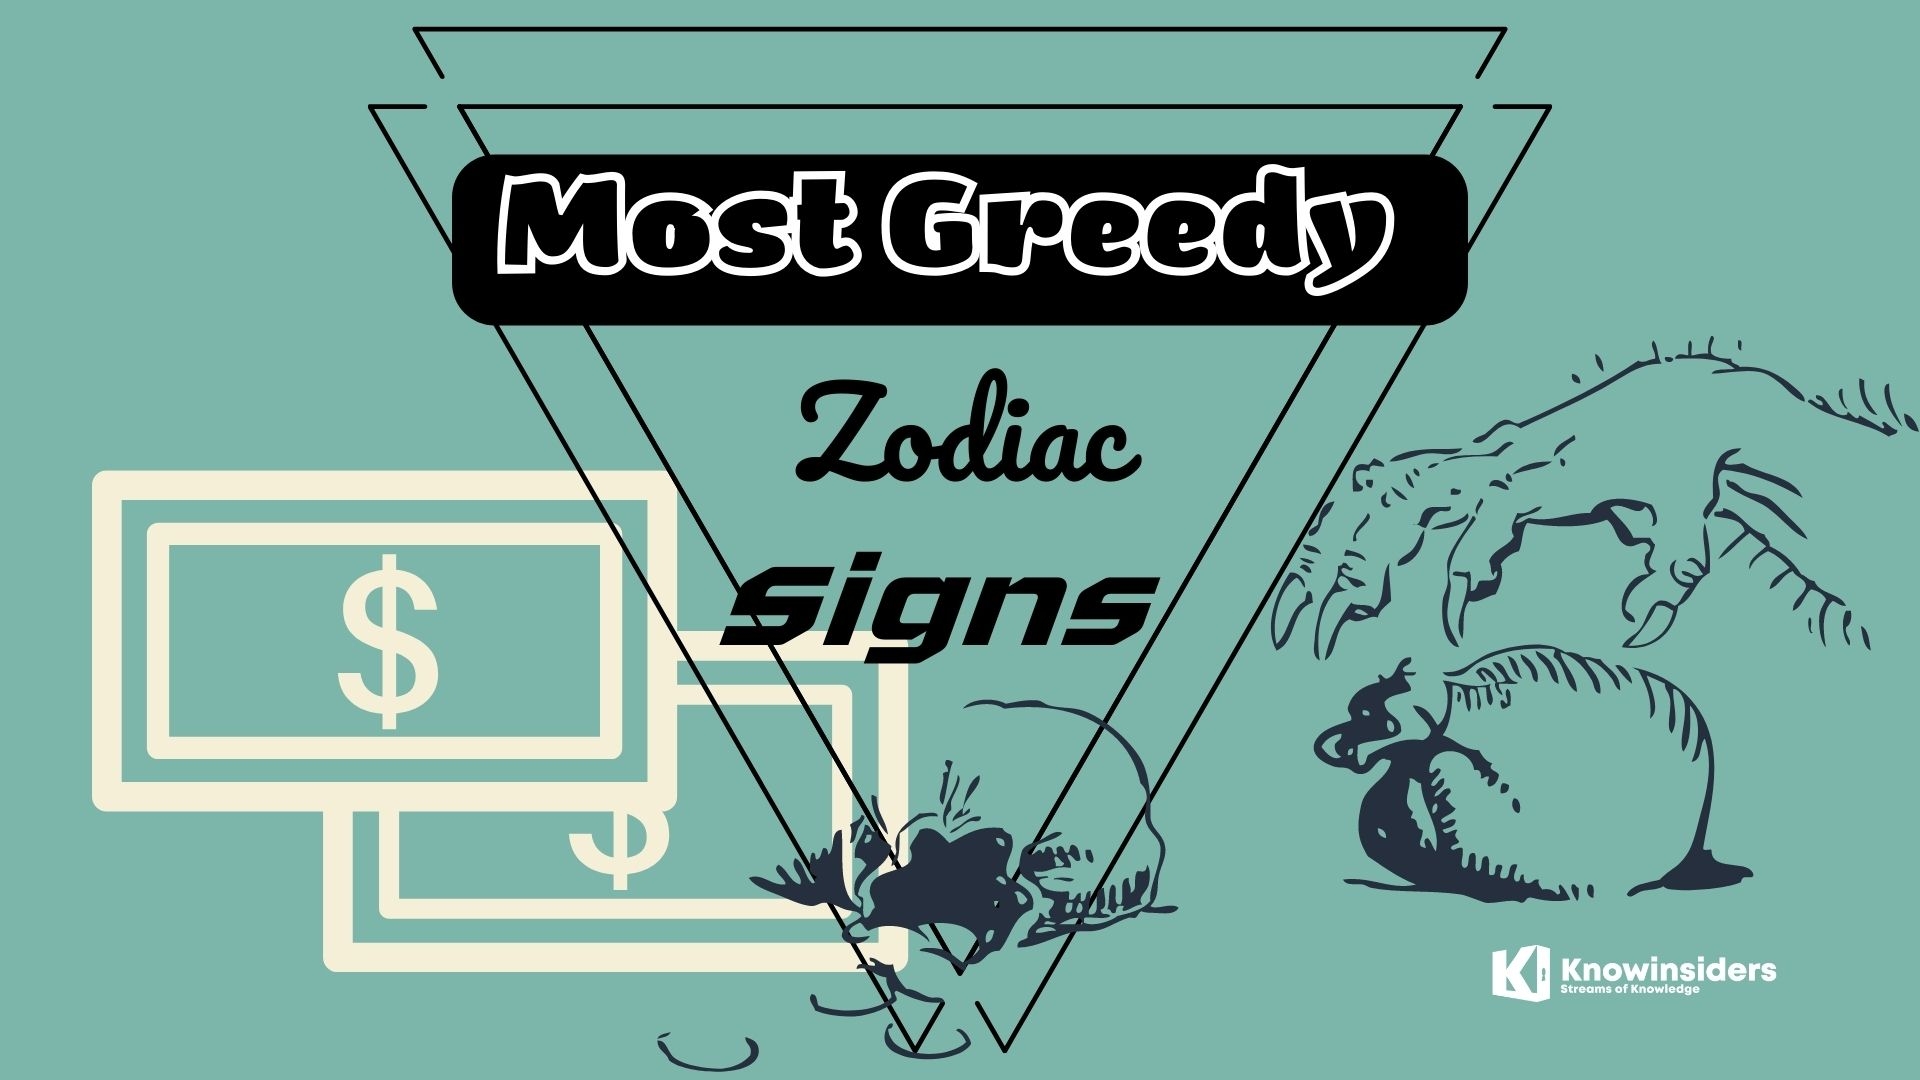 Top 5 Most Greedy Zodiac Signs - According to Astrology